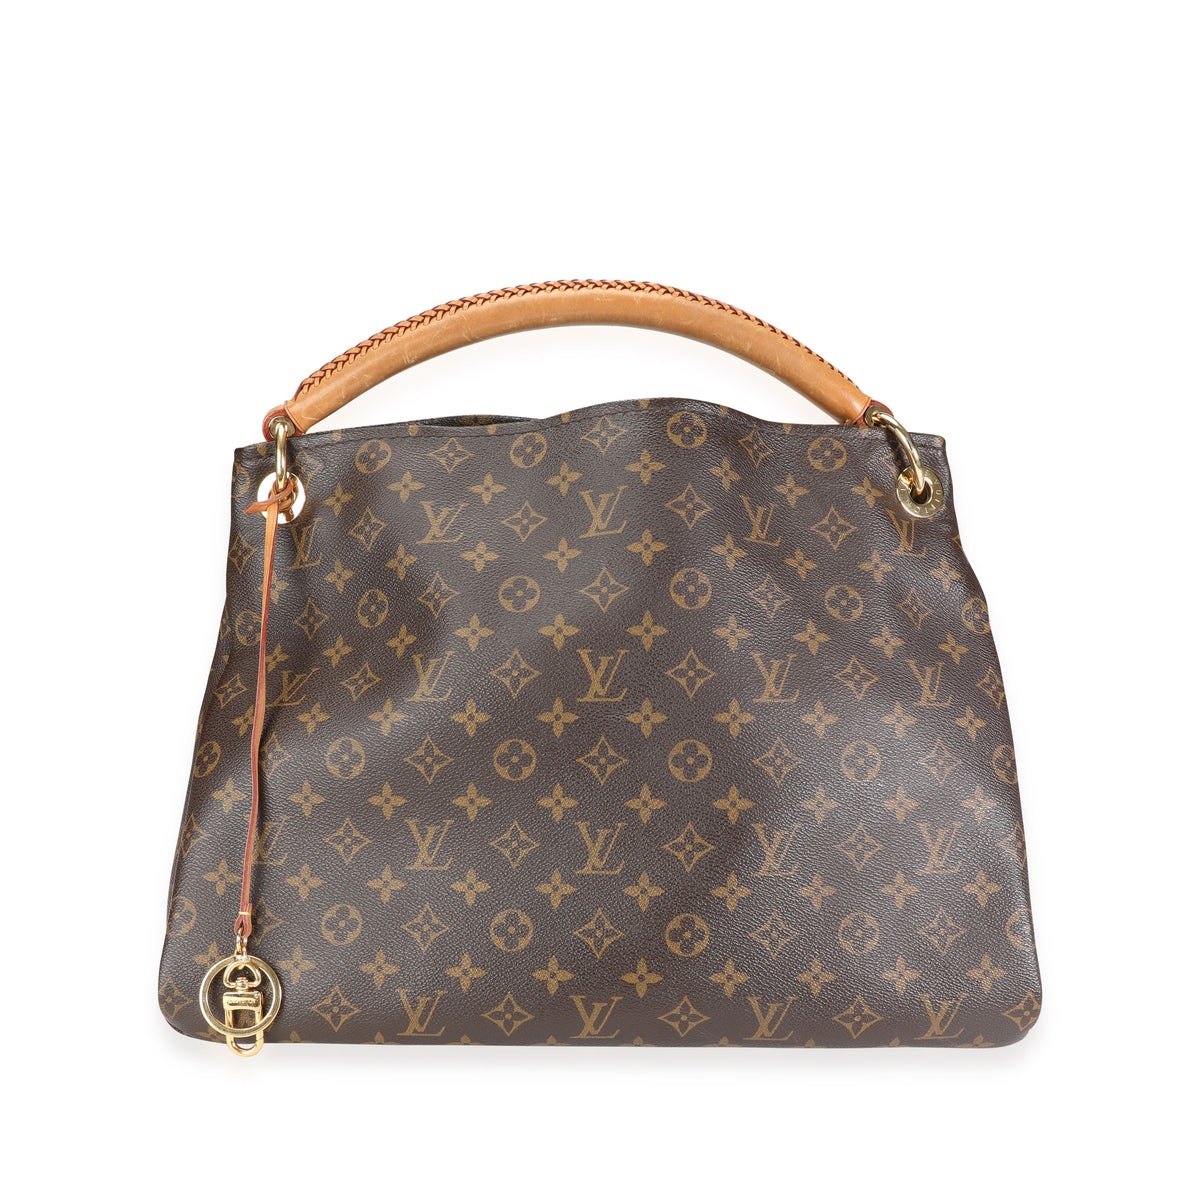 Fashionphile REVIEW 2021  Pre-Owned Louis Vuitton Neverfull PM from 2007 